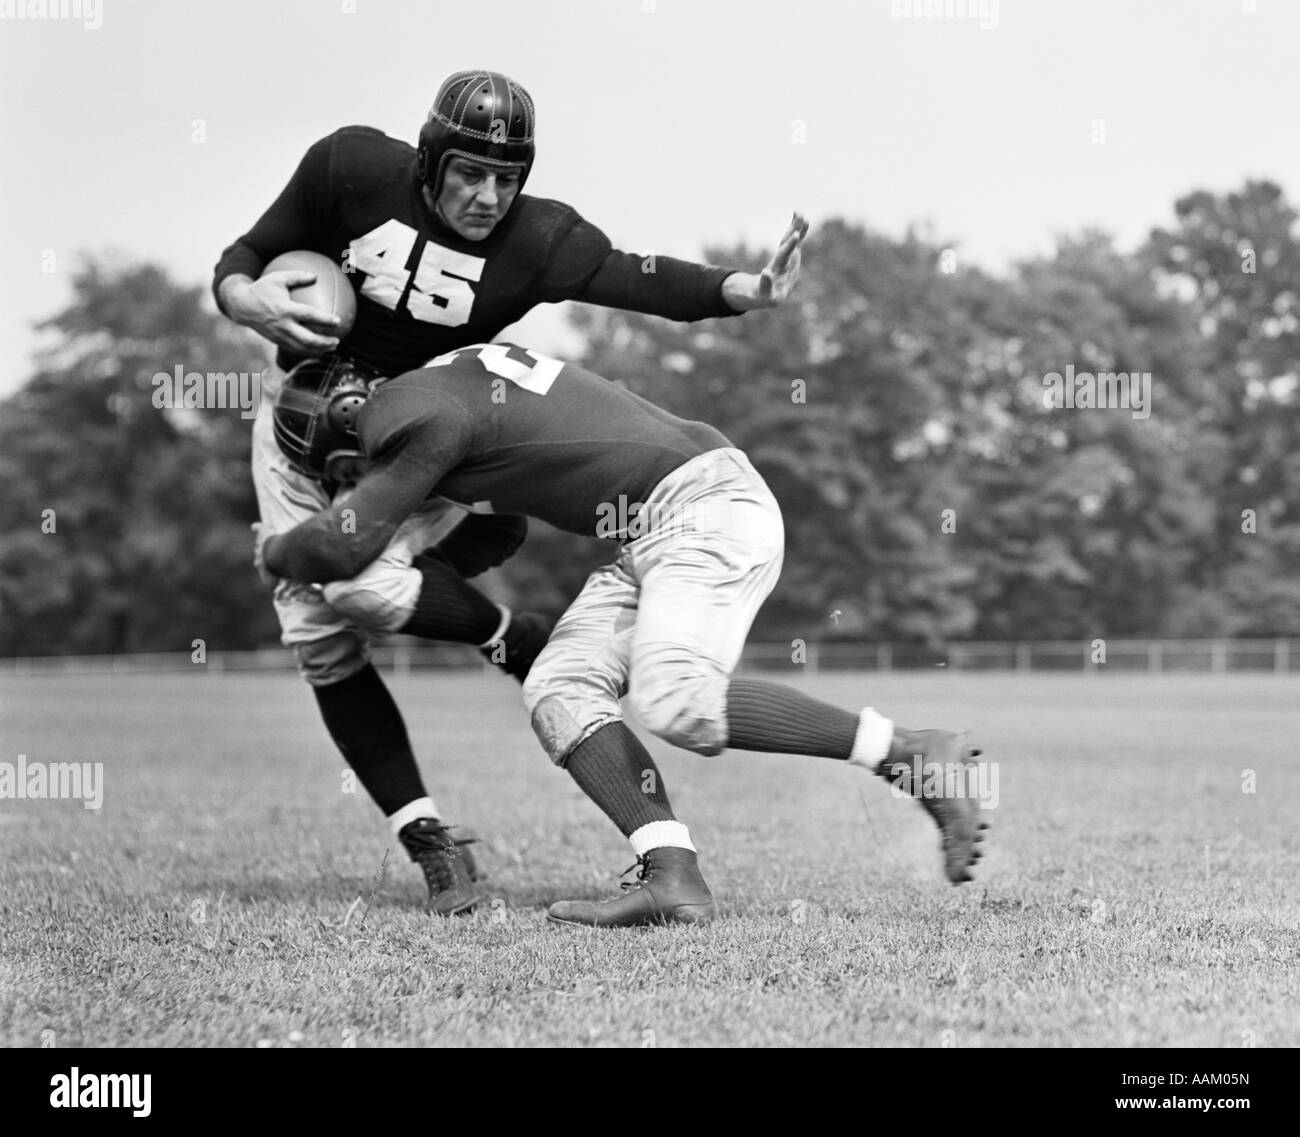 1940s FOOTBALL PLAYER BEING TACKLED Stock Photo